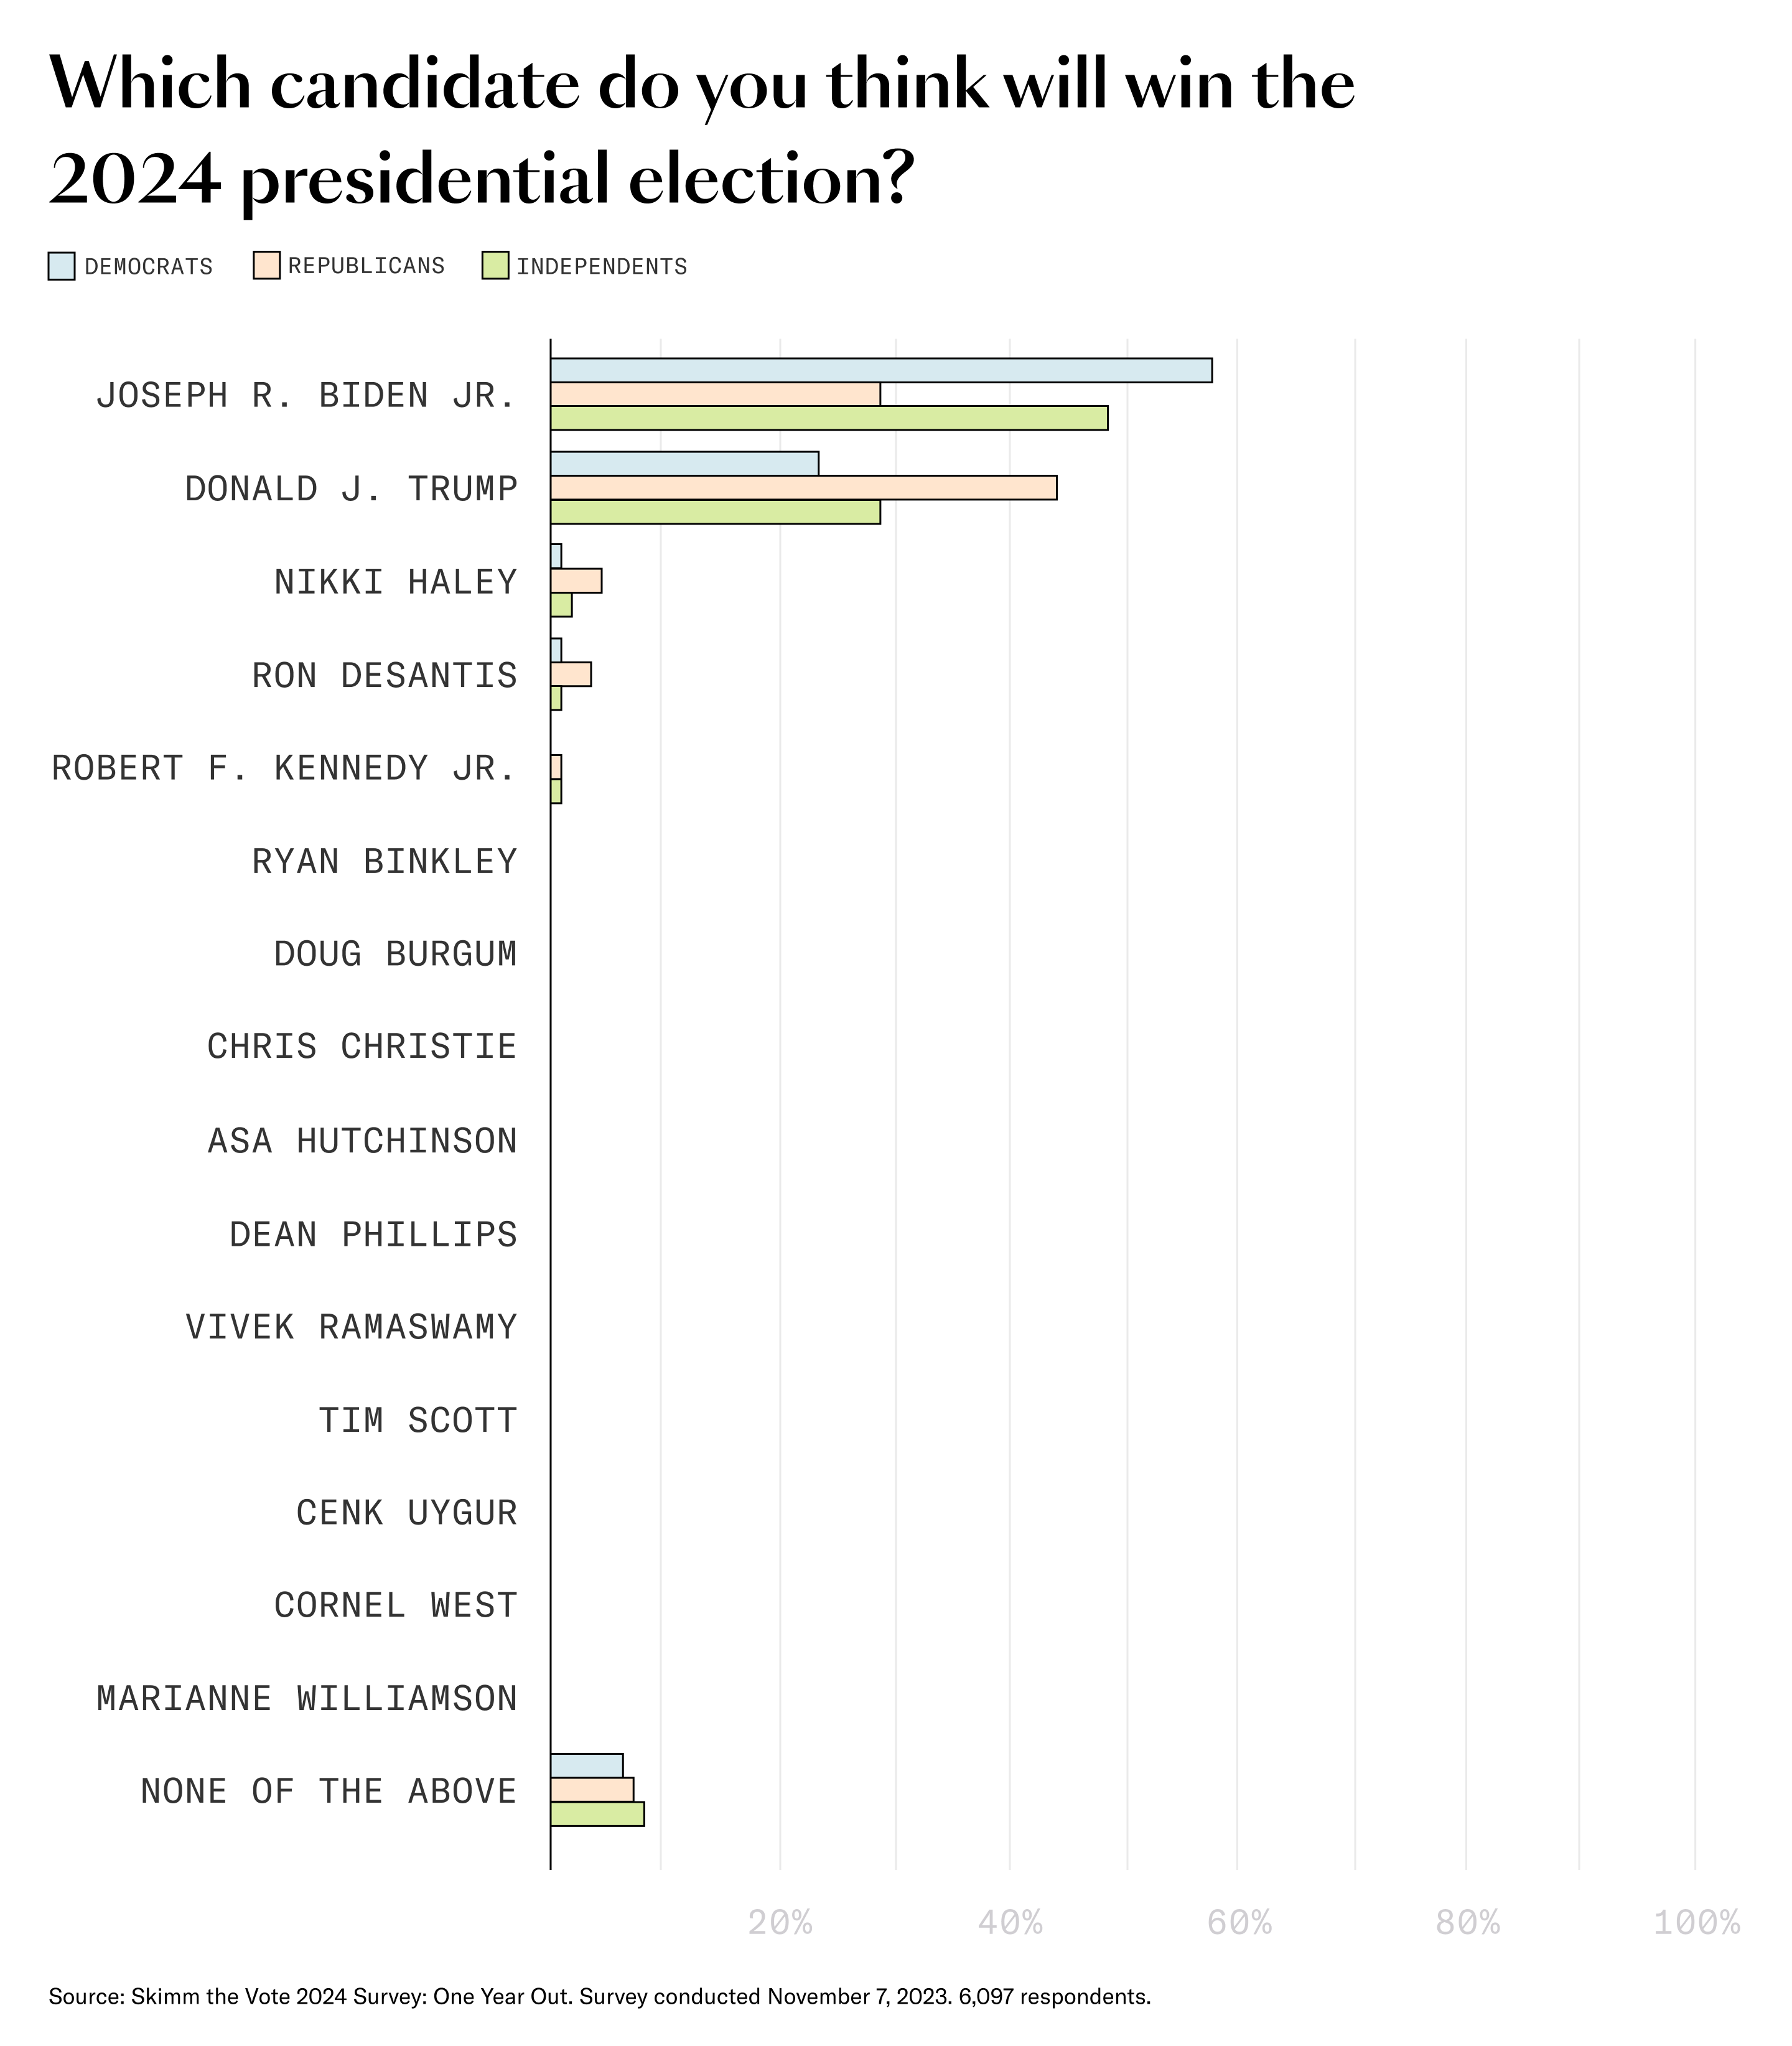 Most Skimm'rs think President Joe Biden will be reelected in the 2024 election. 